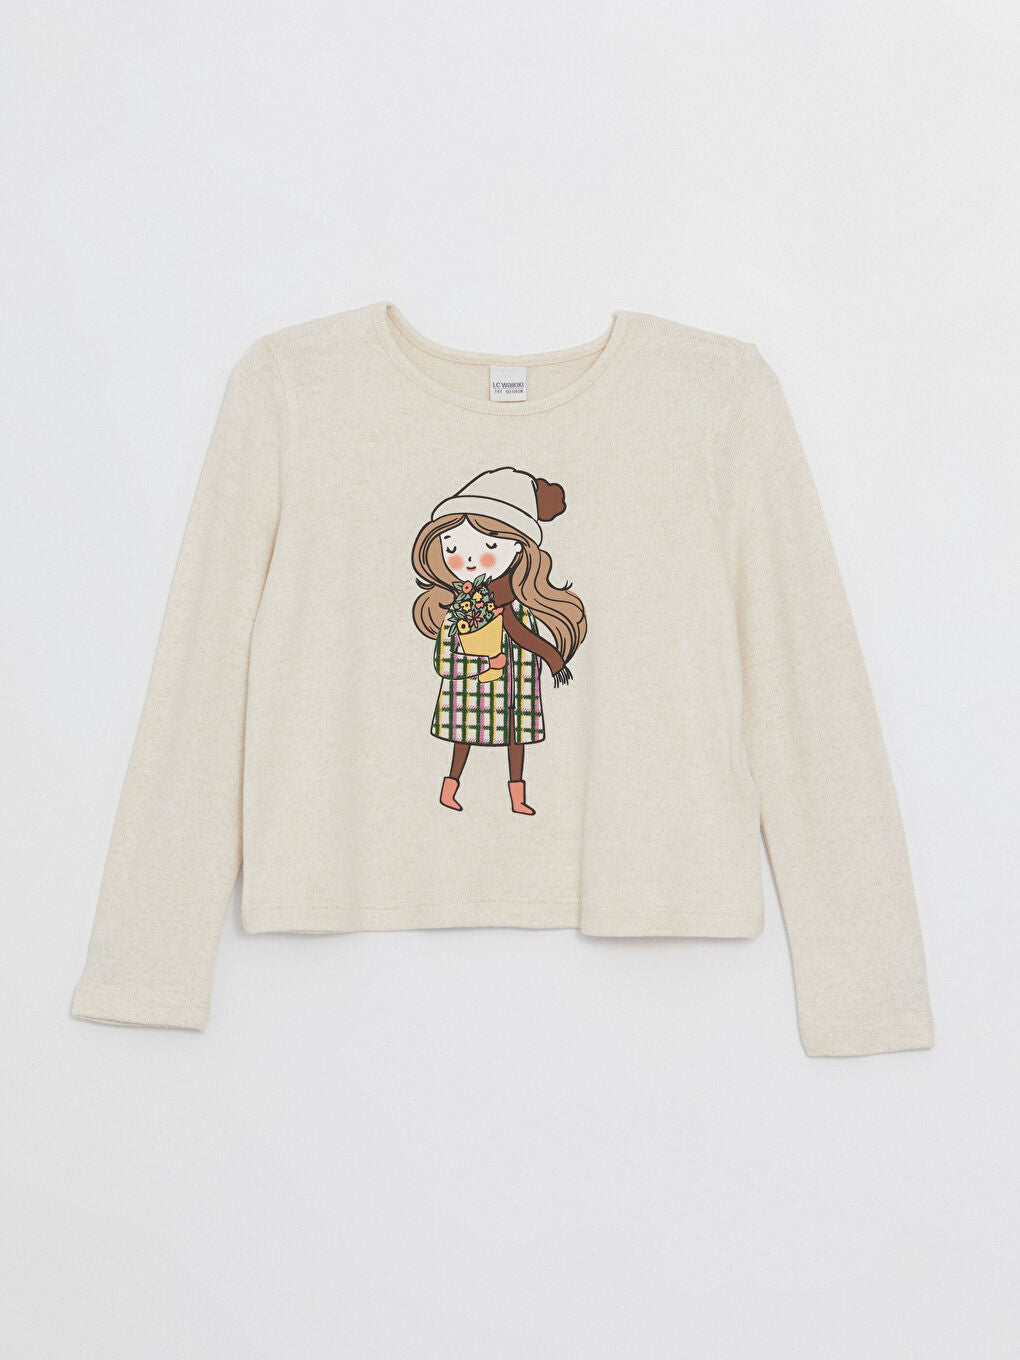 Crew Neck Printed Long Sleeve Girls T-Shirt And Tights